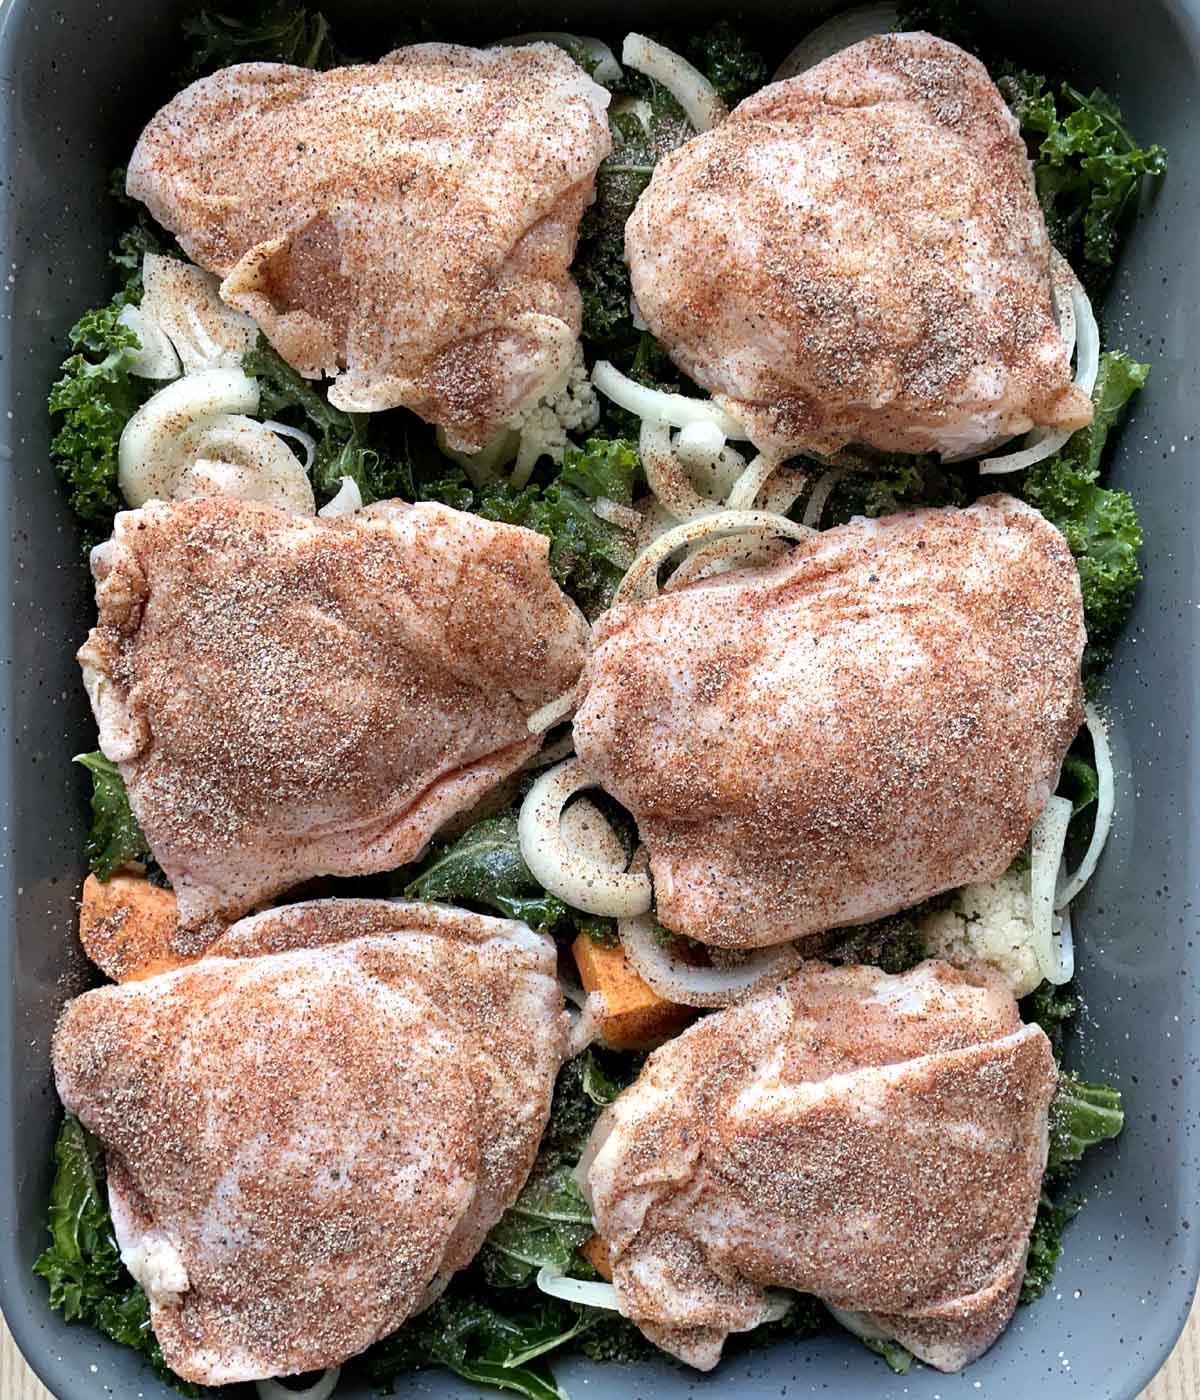 Six raw chicken pieces on a bed of uncooked vegetables in a rectangular roasting pan.